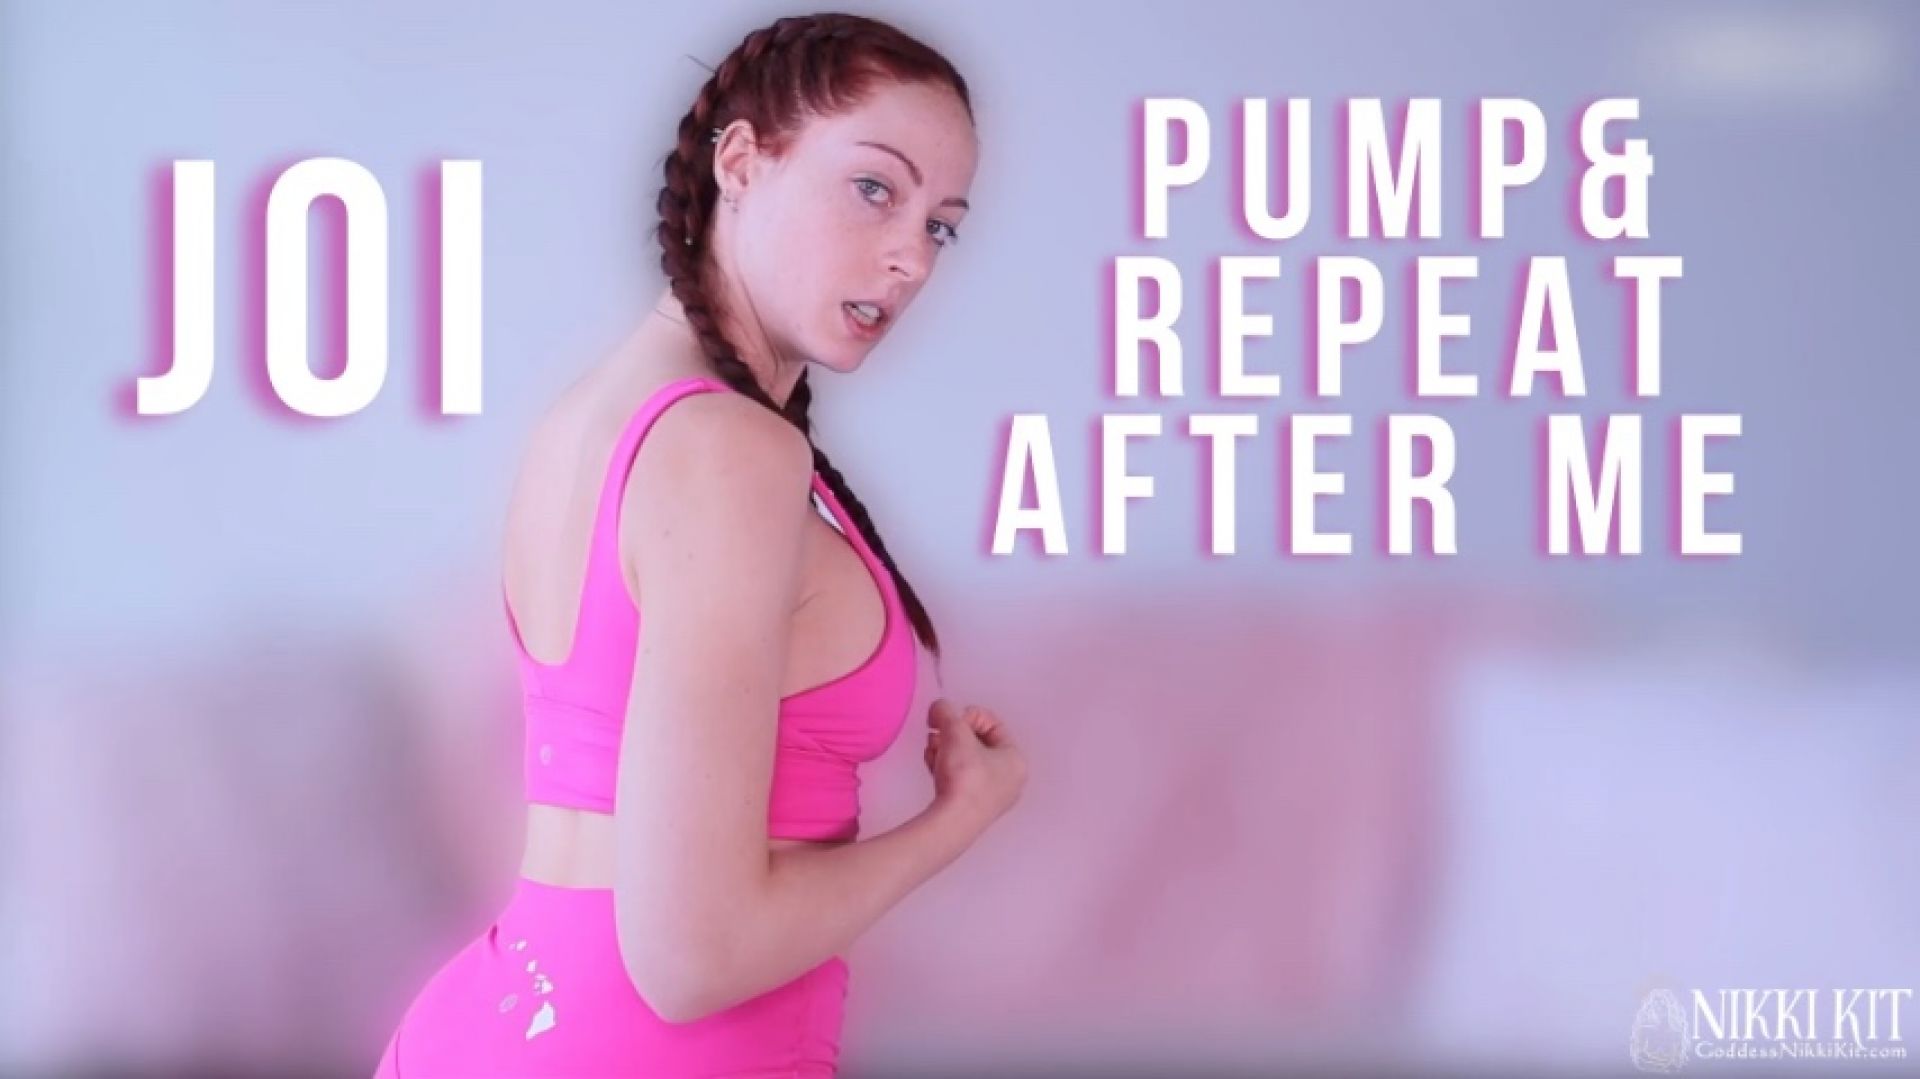 leaked Pump and Repeat After Me JOI thumbnail